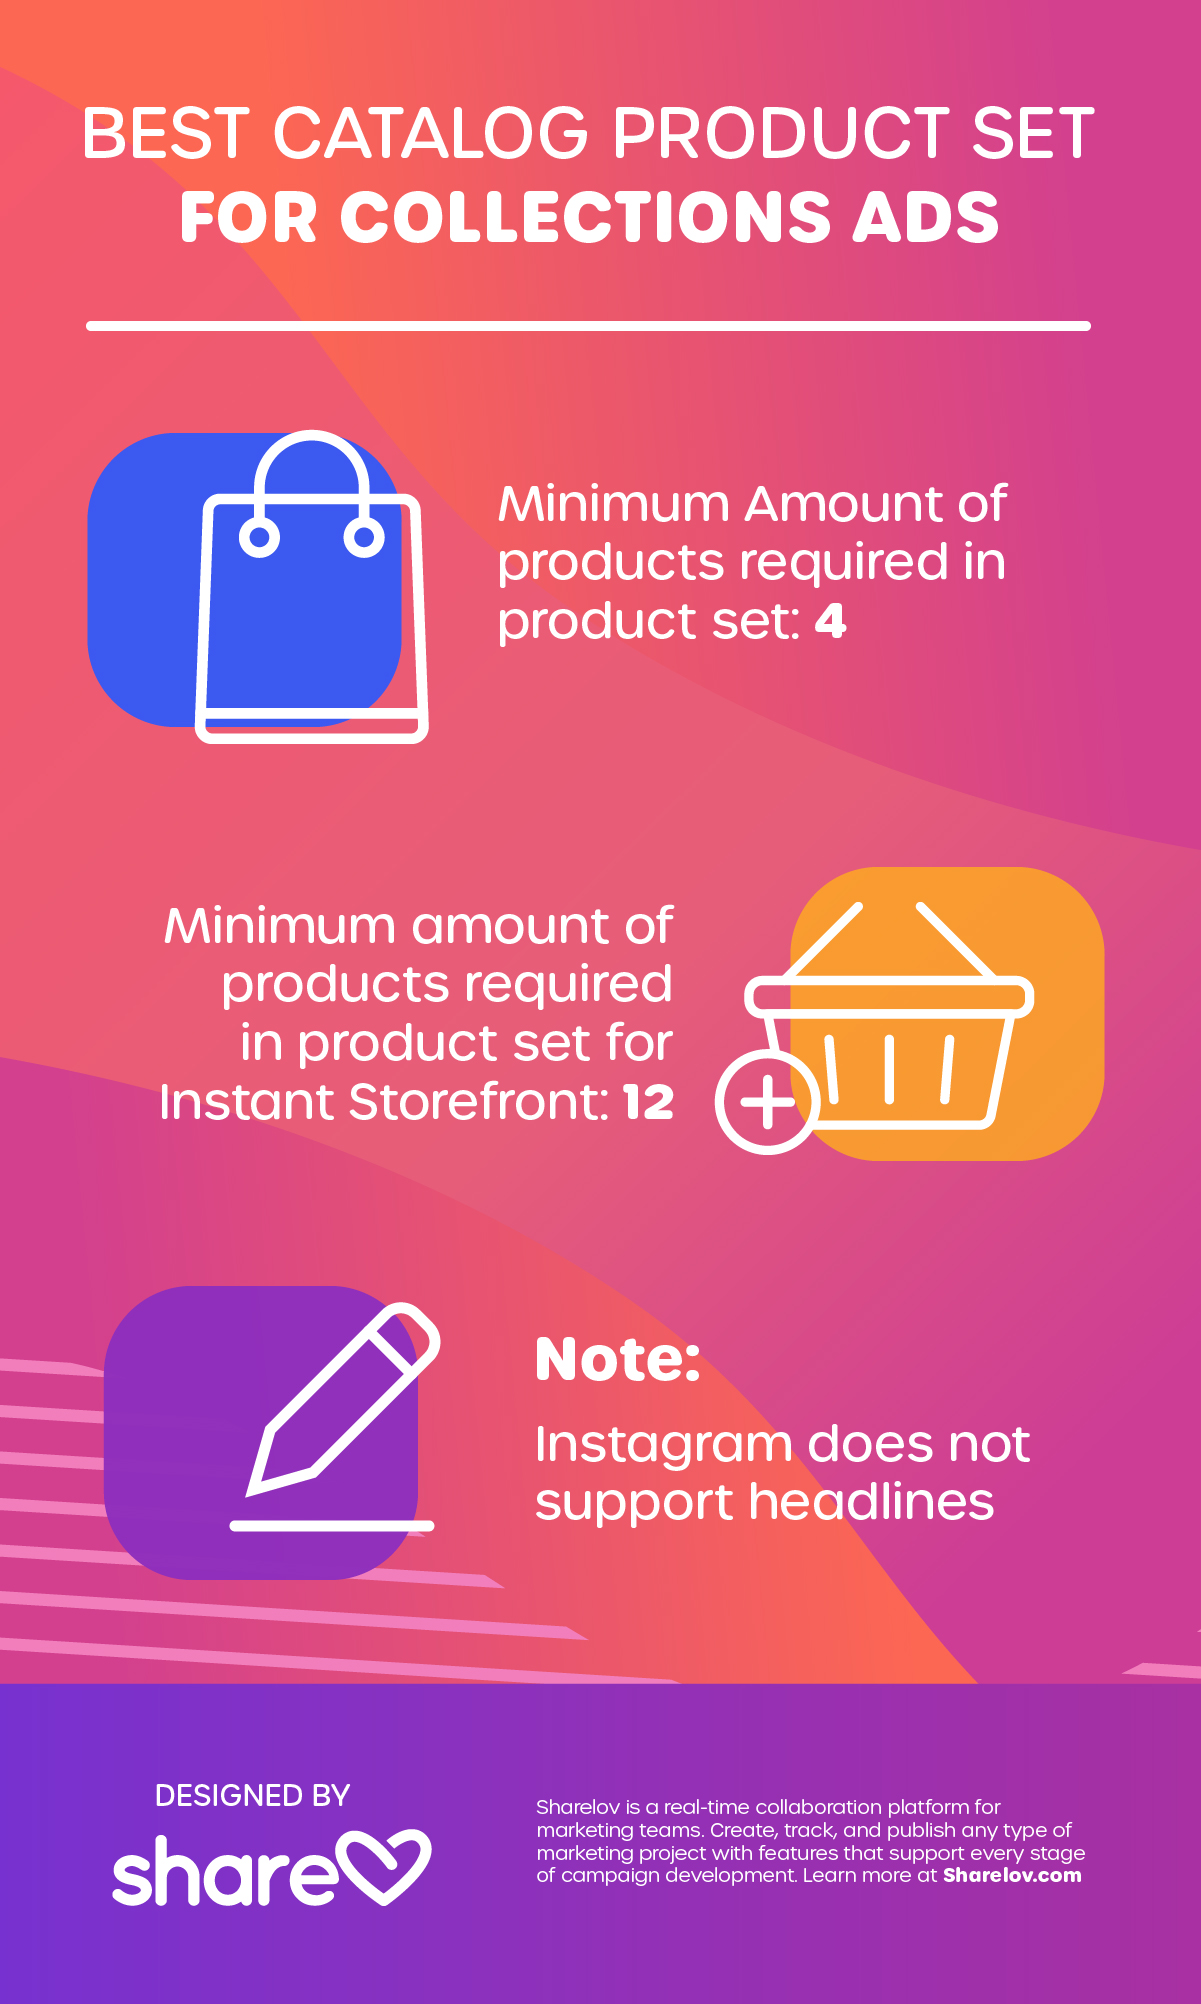 Best Catalog Product Set Specs for Collections Ads infographic